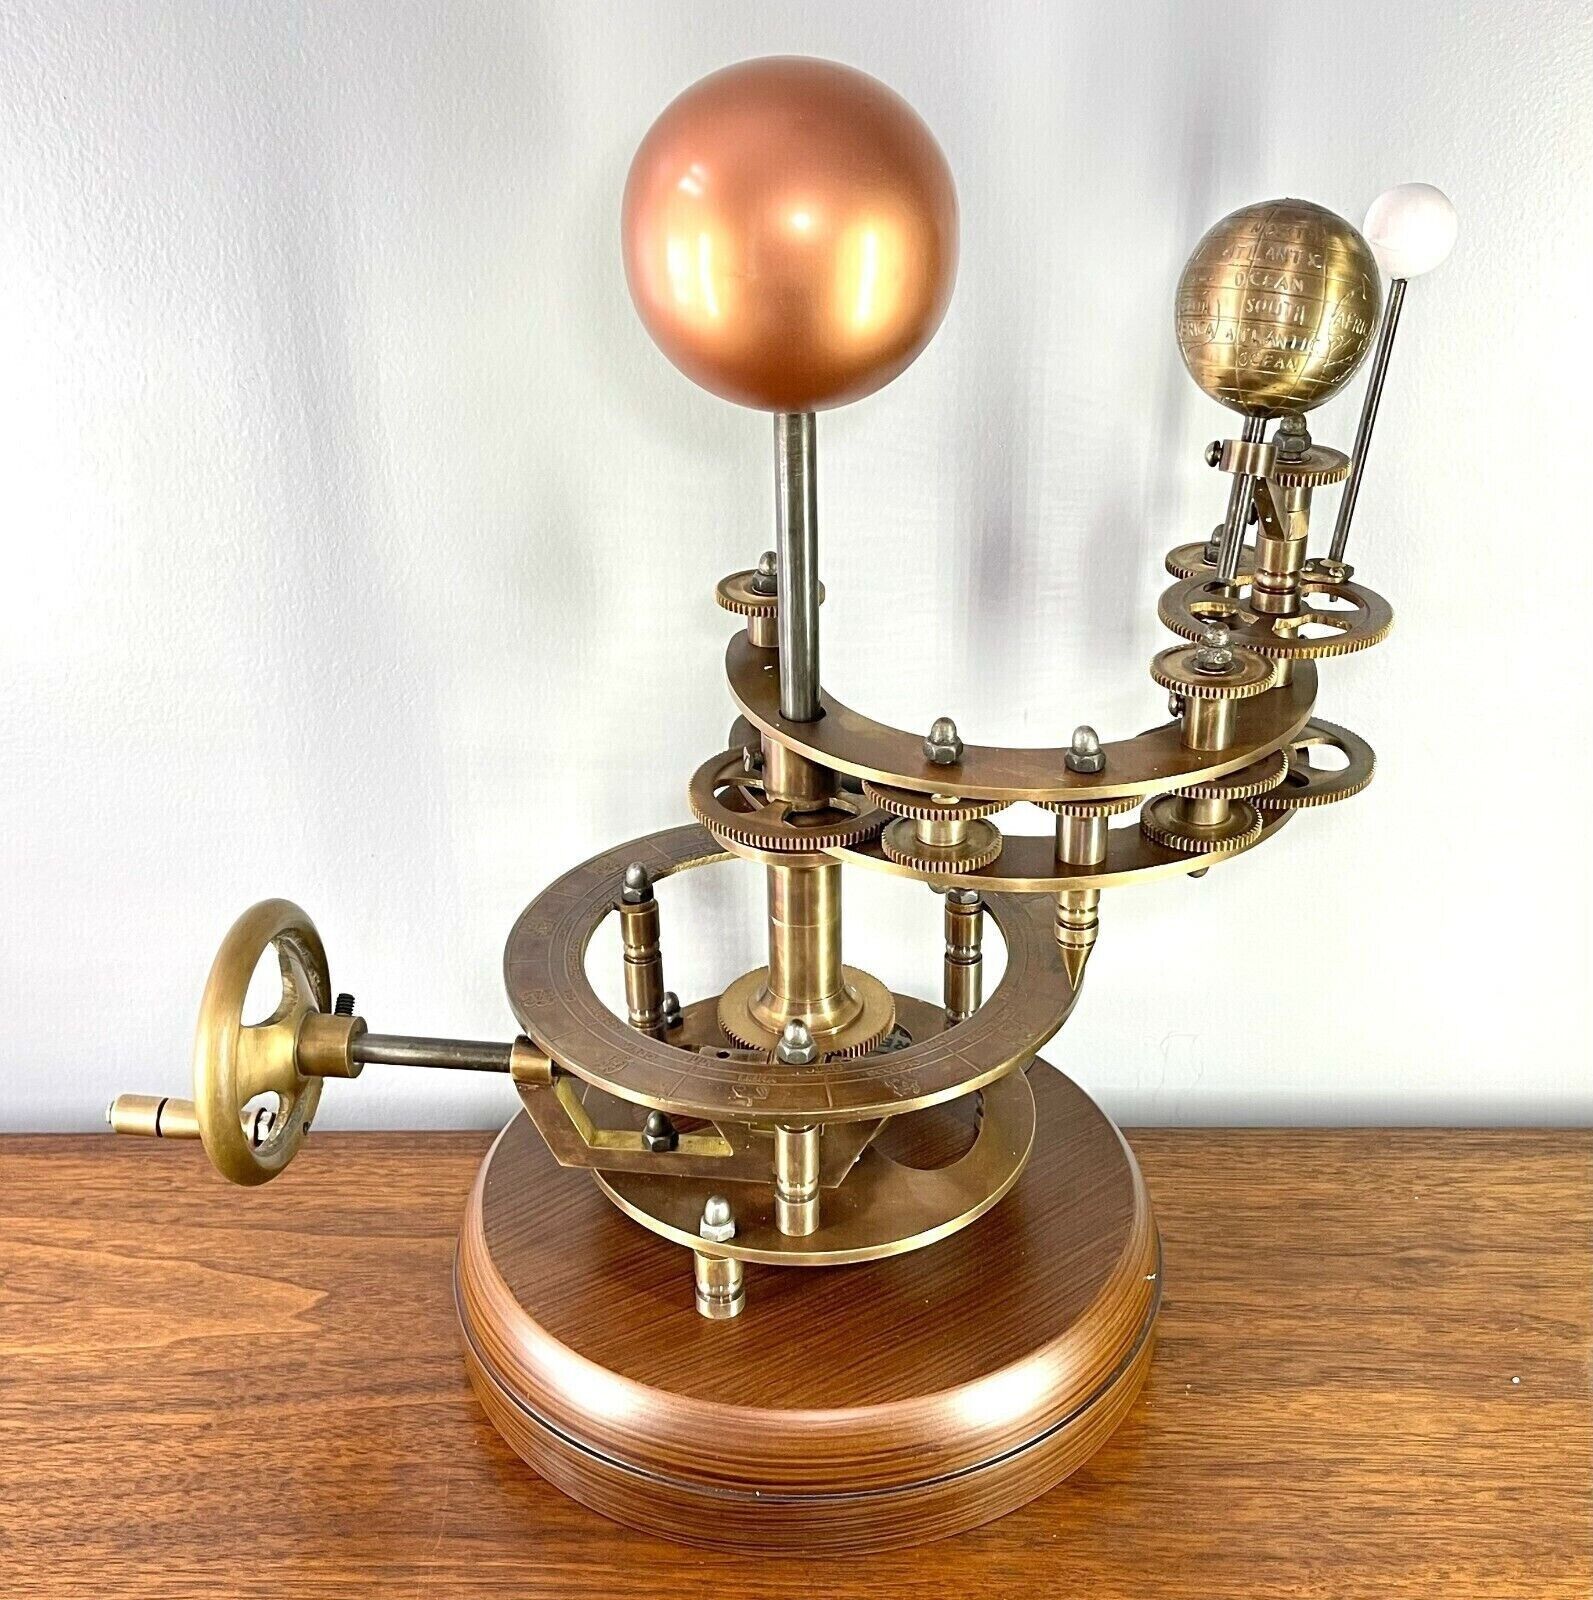 Heavy Solid Bronze Solar System Orrery Sun, Earth And Moon with wooden base